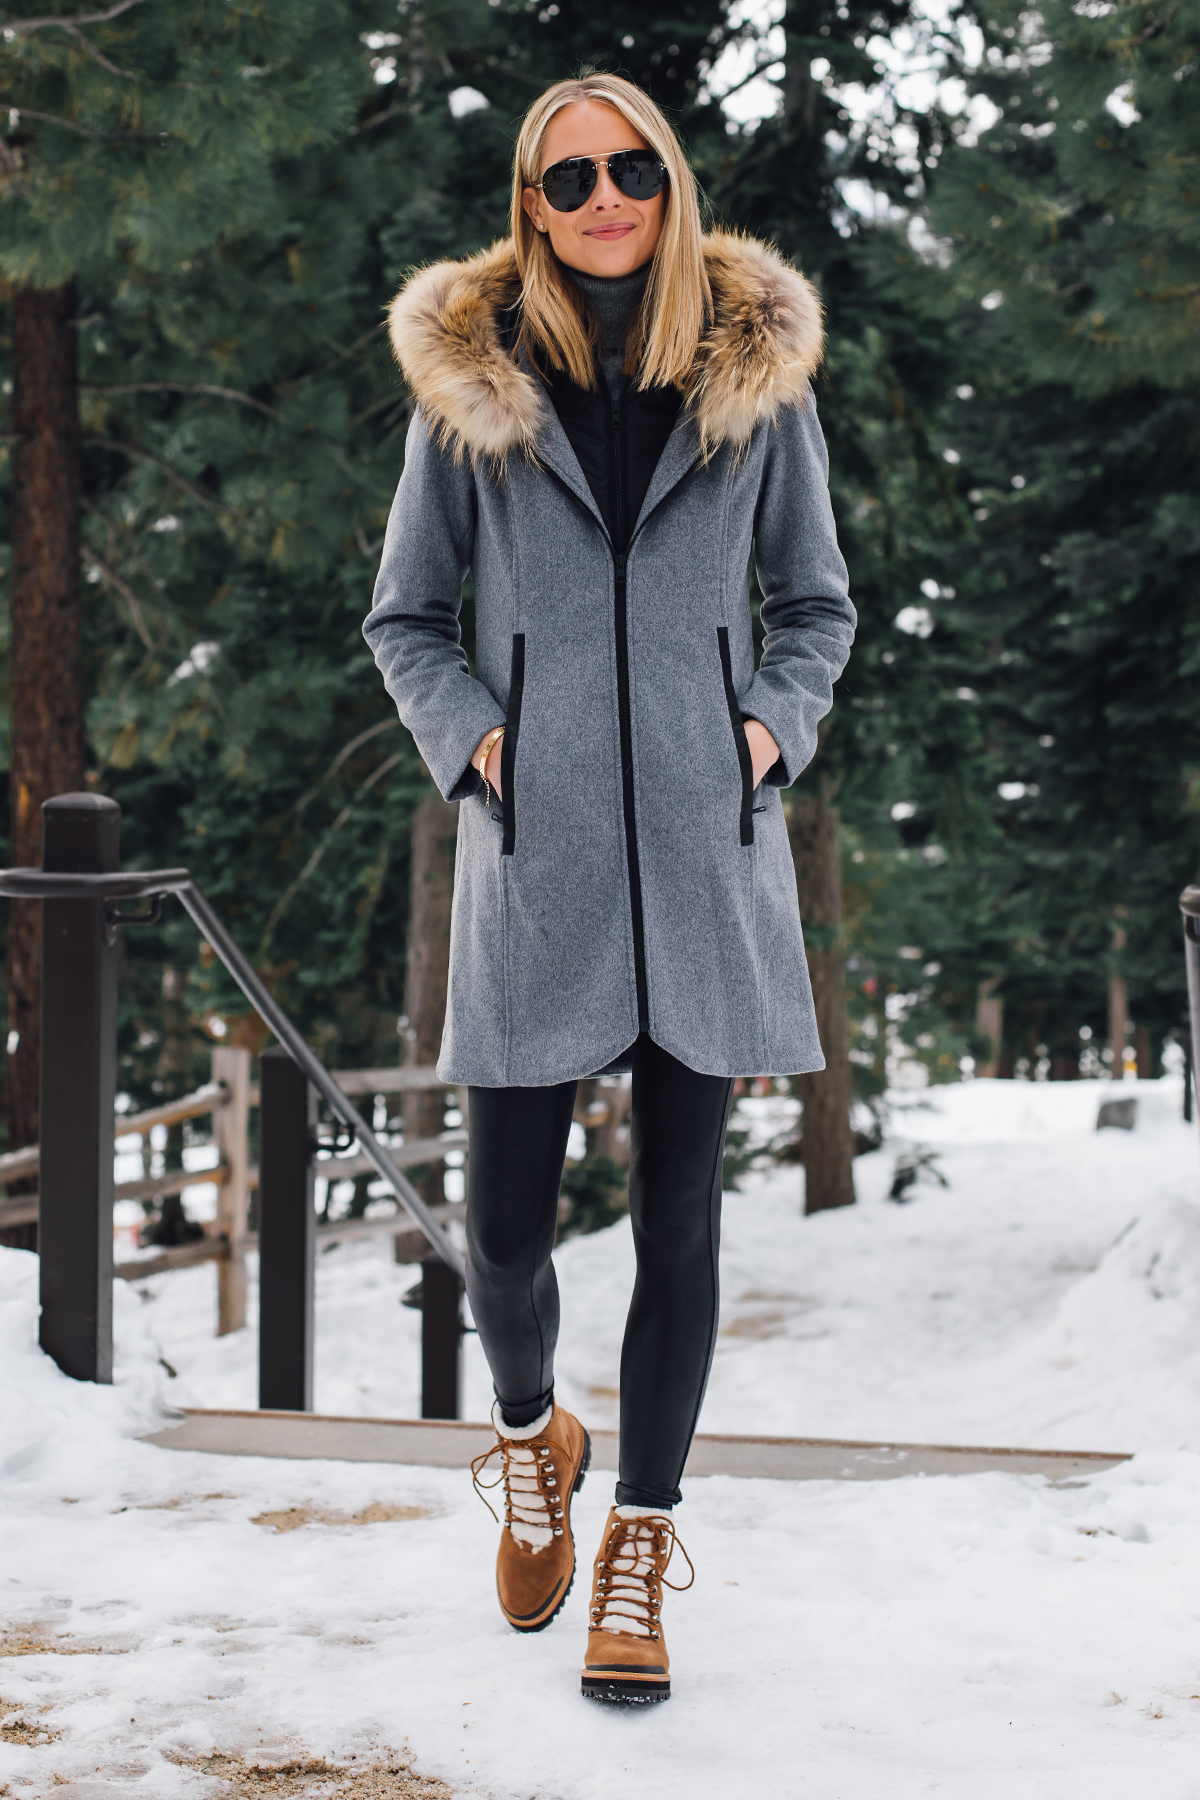 Blonde Woman Wearing Grey Wool Coat with Faux Fur Hood Spanx Black Faux Leather Leggings Marc Fisher Brown Suede Shearling Booties Outfit Fashion Jackson San Diego Fashion Blogger Lake Tahoe Winter Outfit